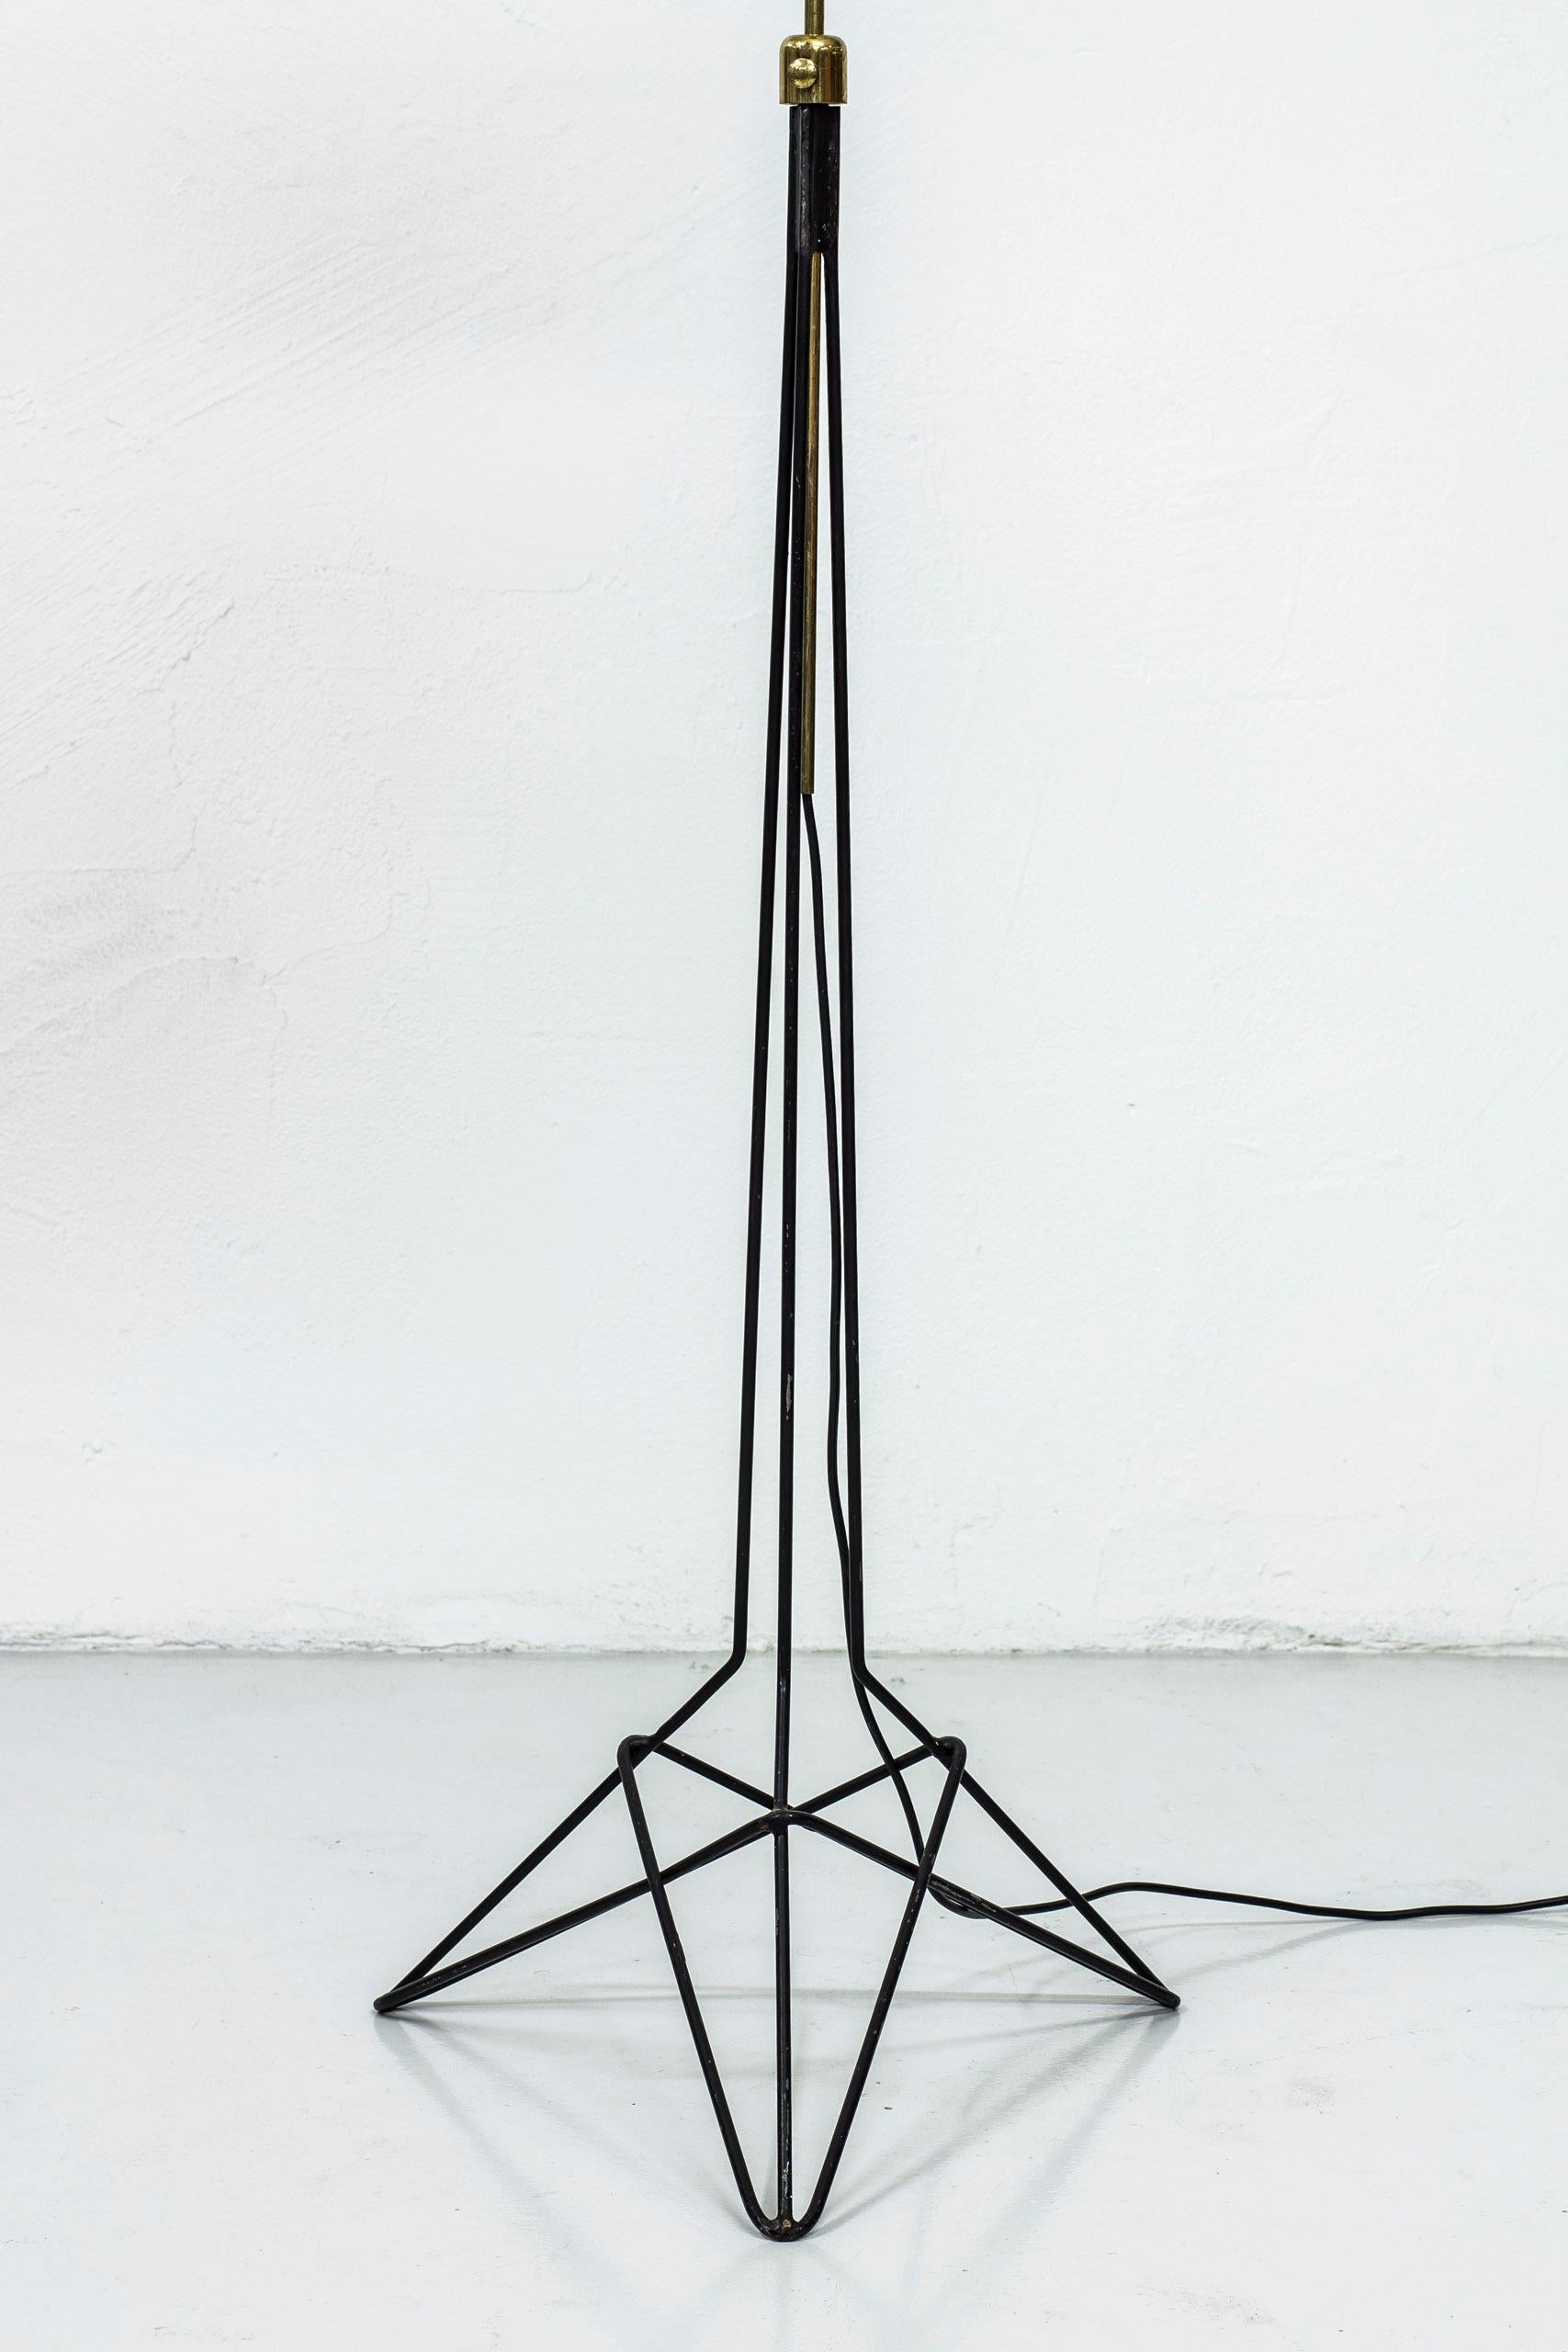 Floor lamp designed by Nils Strinning. Produced by his own company String Design during the 1950s. Black lacquered metal base and brass. New hand sewn, pleated, chintz fabric shade in off-white. Light switch on the lamp fixture. Good vintage